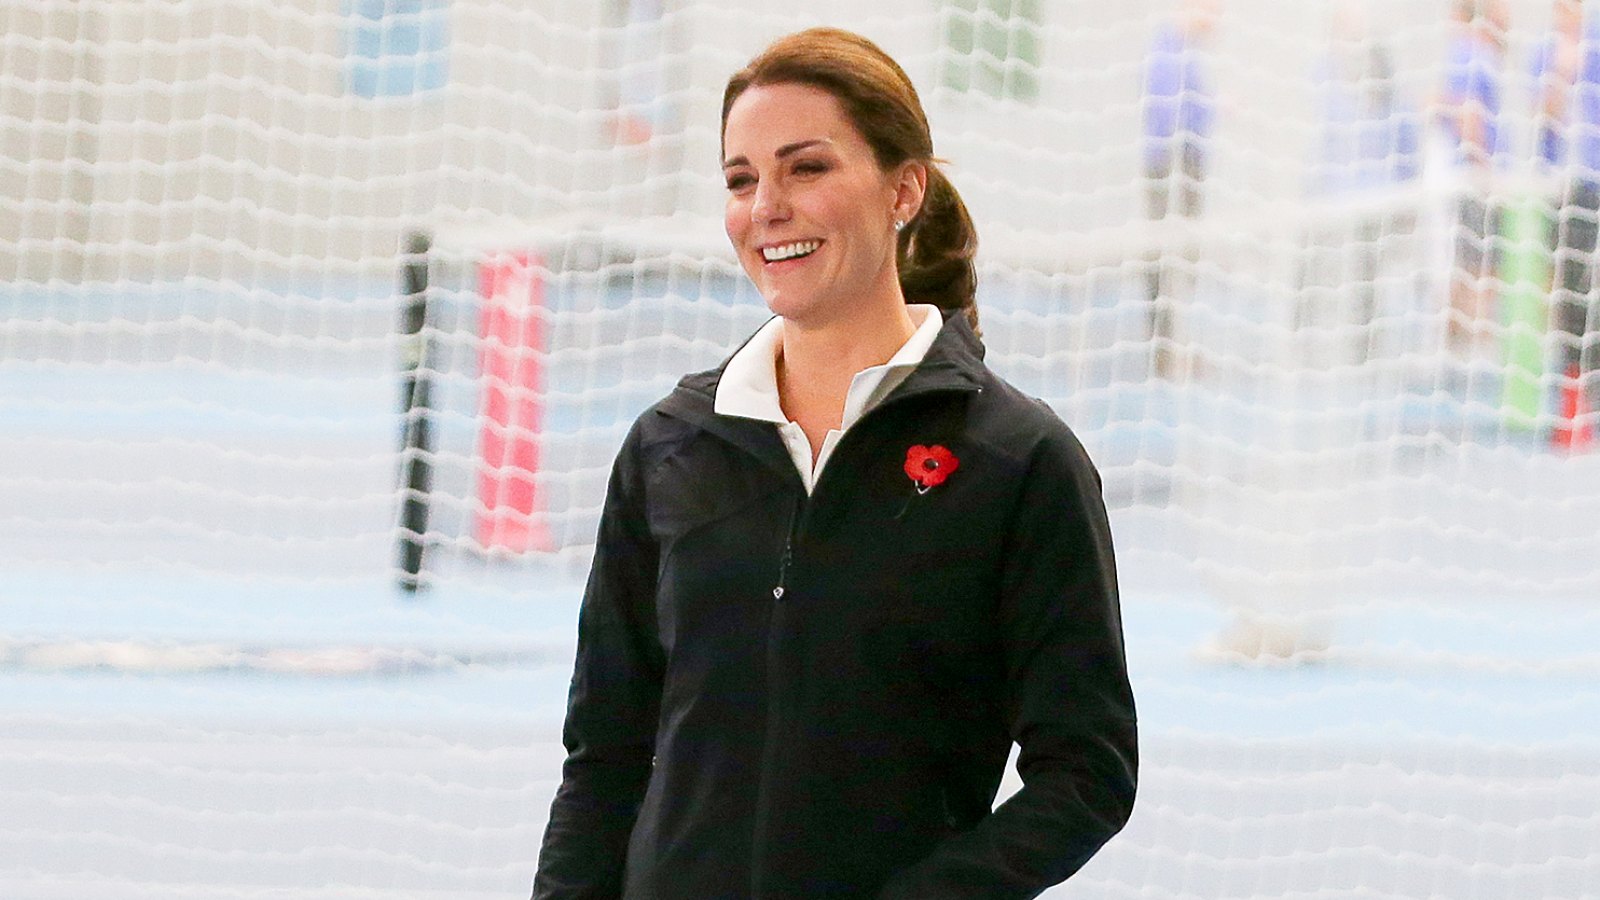 Catherine, Duchess of Cambridge plays tennis as she visits the Lawn Tennis Association at National Tennis Centre on October 31, 2017 in London, England.